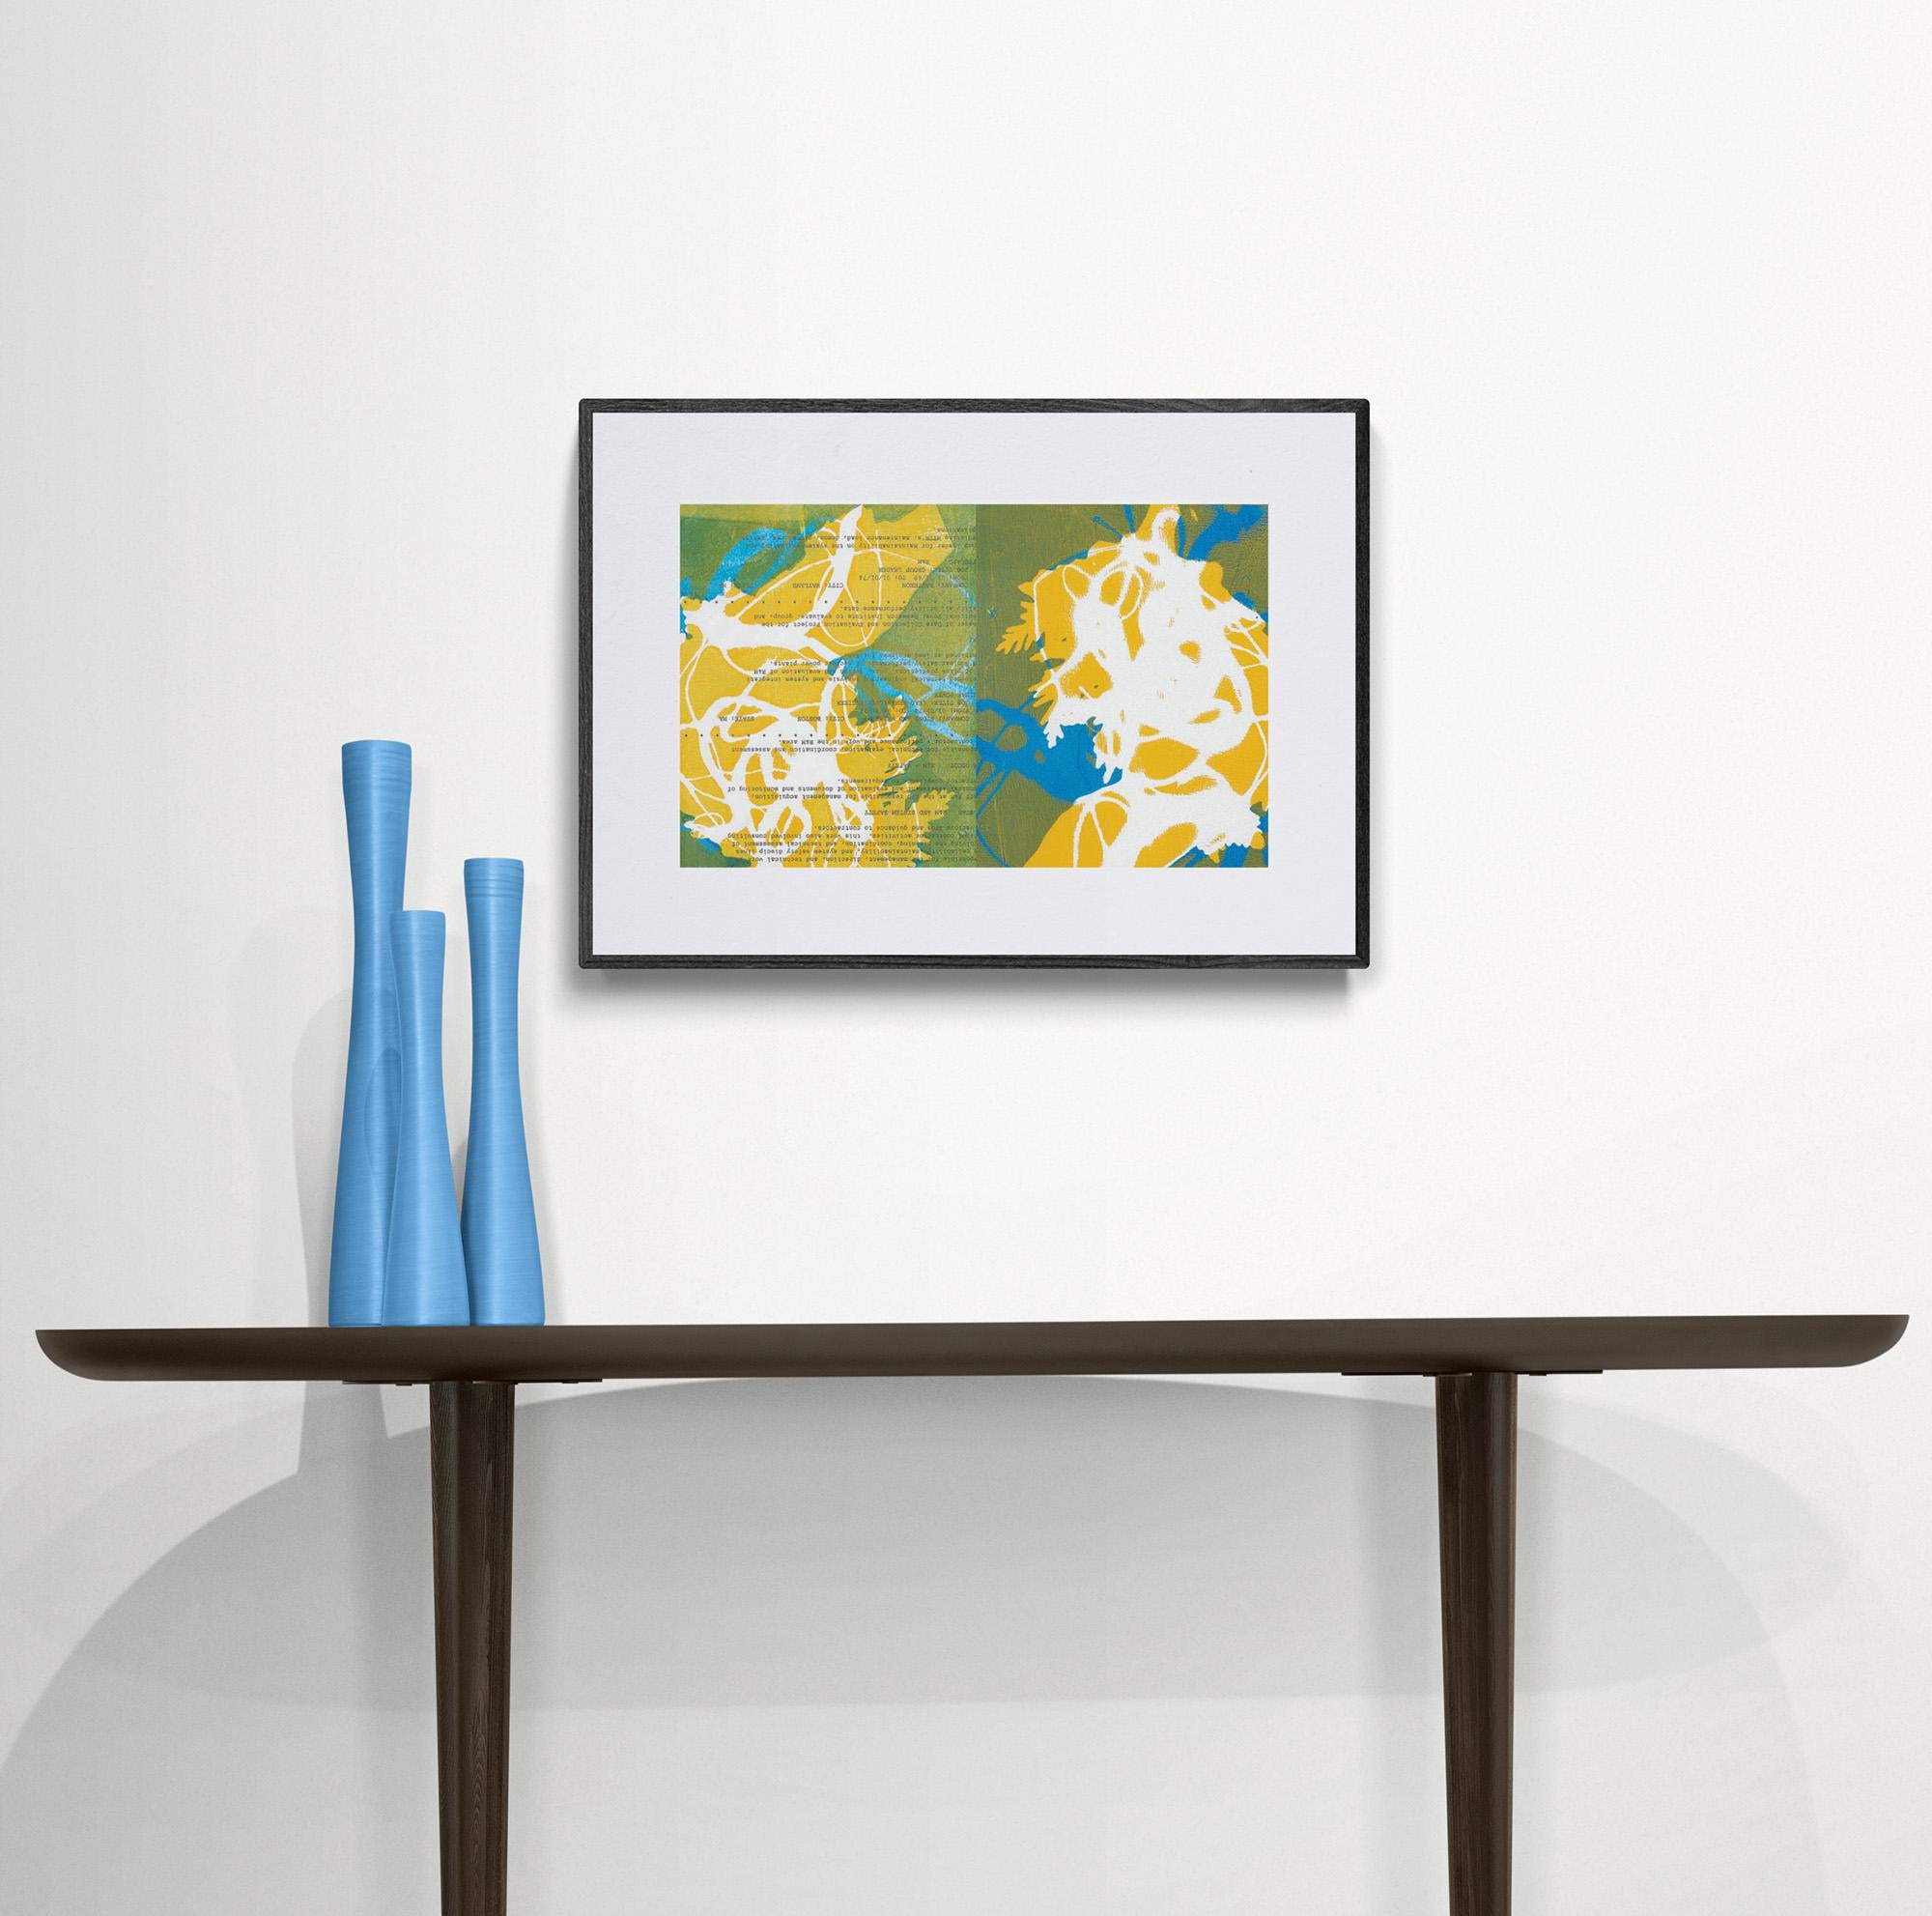 Monica DeSalvo’s “Thar She Blows” merges two acrylic abstract monoprints into a 20 x 16  inch work with a vertical seam. Crisp masses of yellow and olive green with curvy strands of royal blue and white are printed onto a typewritten report with